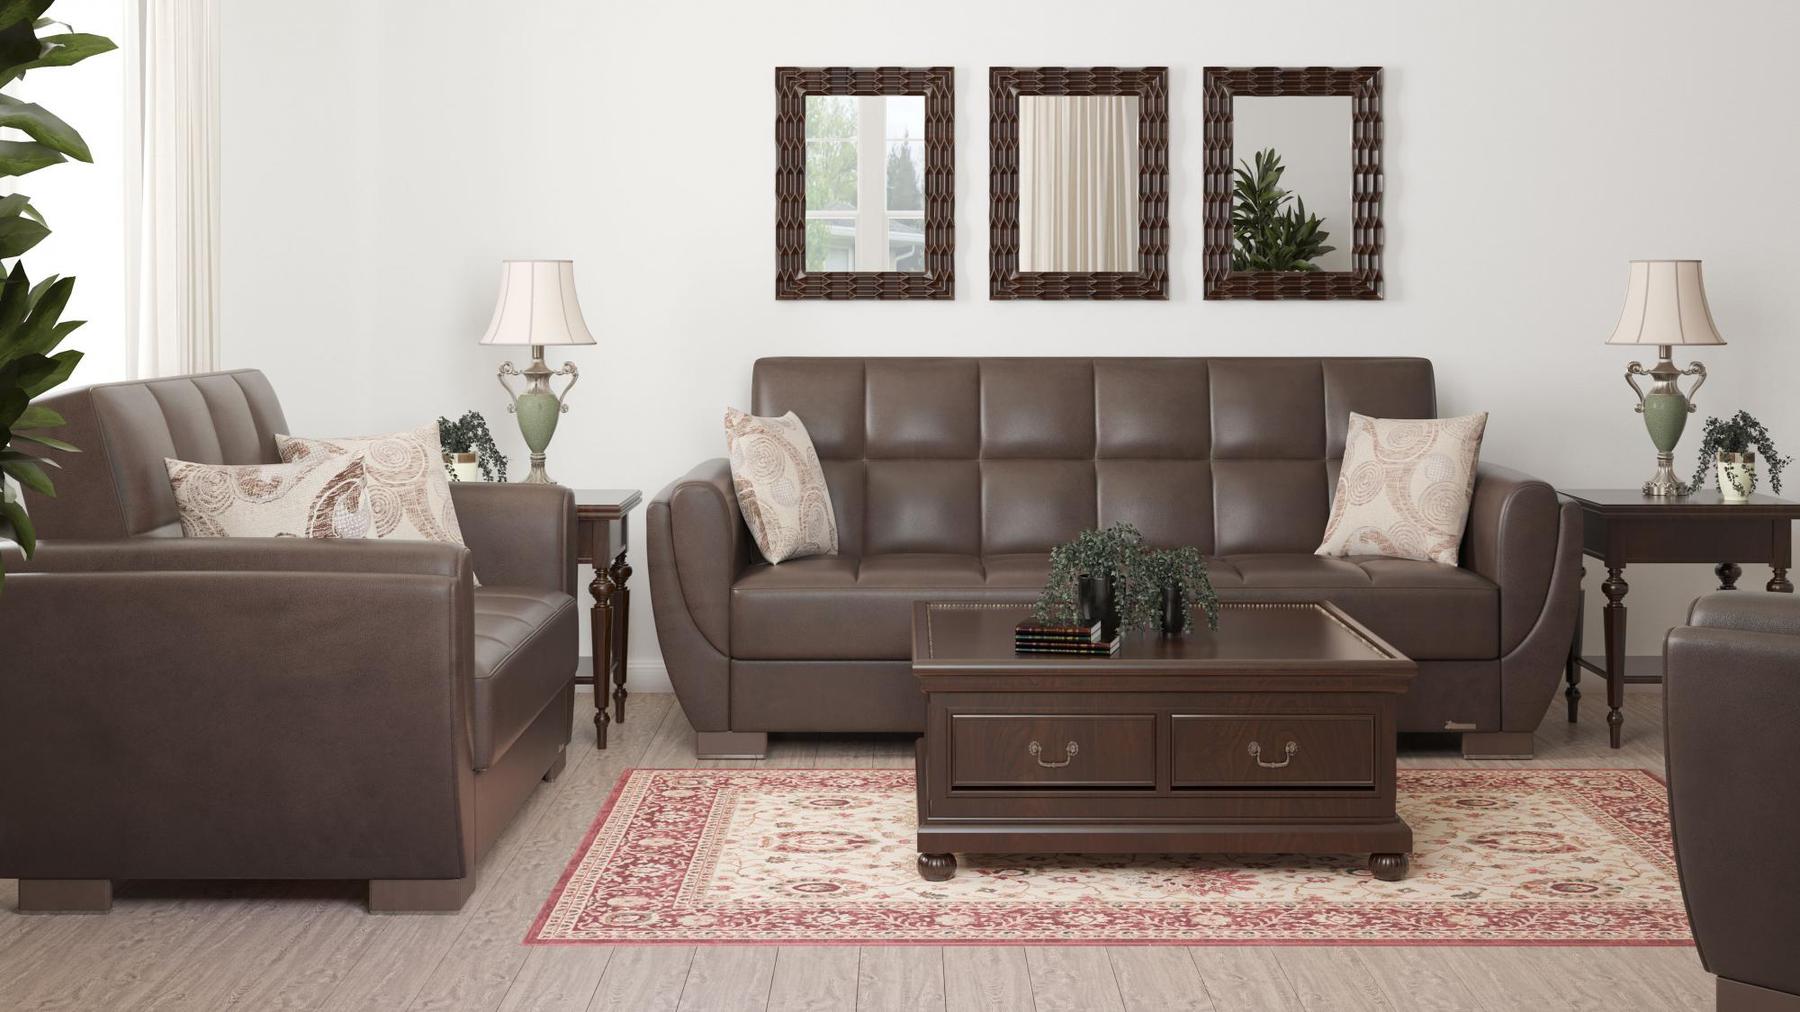 Modern design, Dark Brown , Artificial Leather upholstered convertible sleeper Sofabed with underseat storage from Voyage Shelter by Ottomanson in living room lifestyle setting with another piece of furniture. This Sofabed measures 94 inches width by 36 inches depth by 41 inches height.